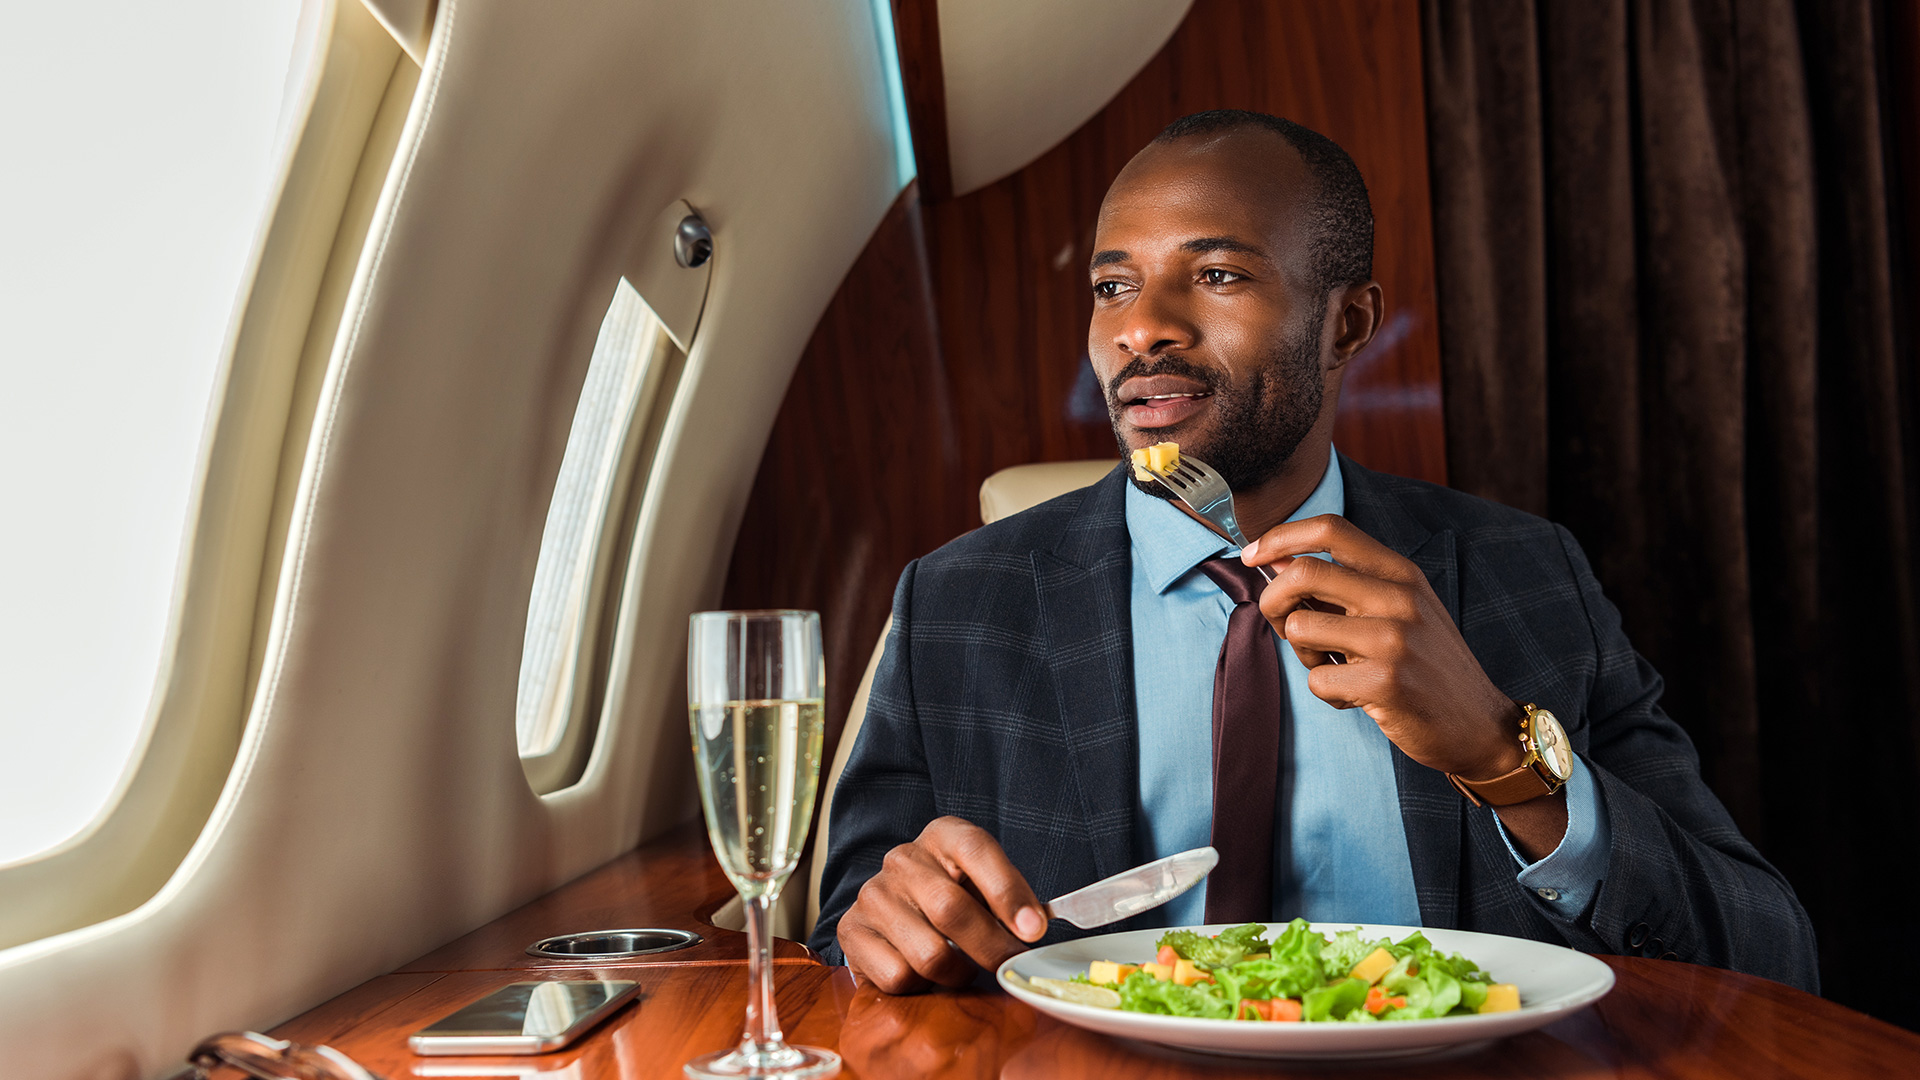 Business Man Eating Salad in Private Jet